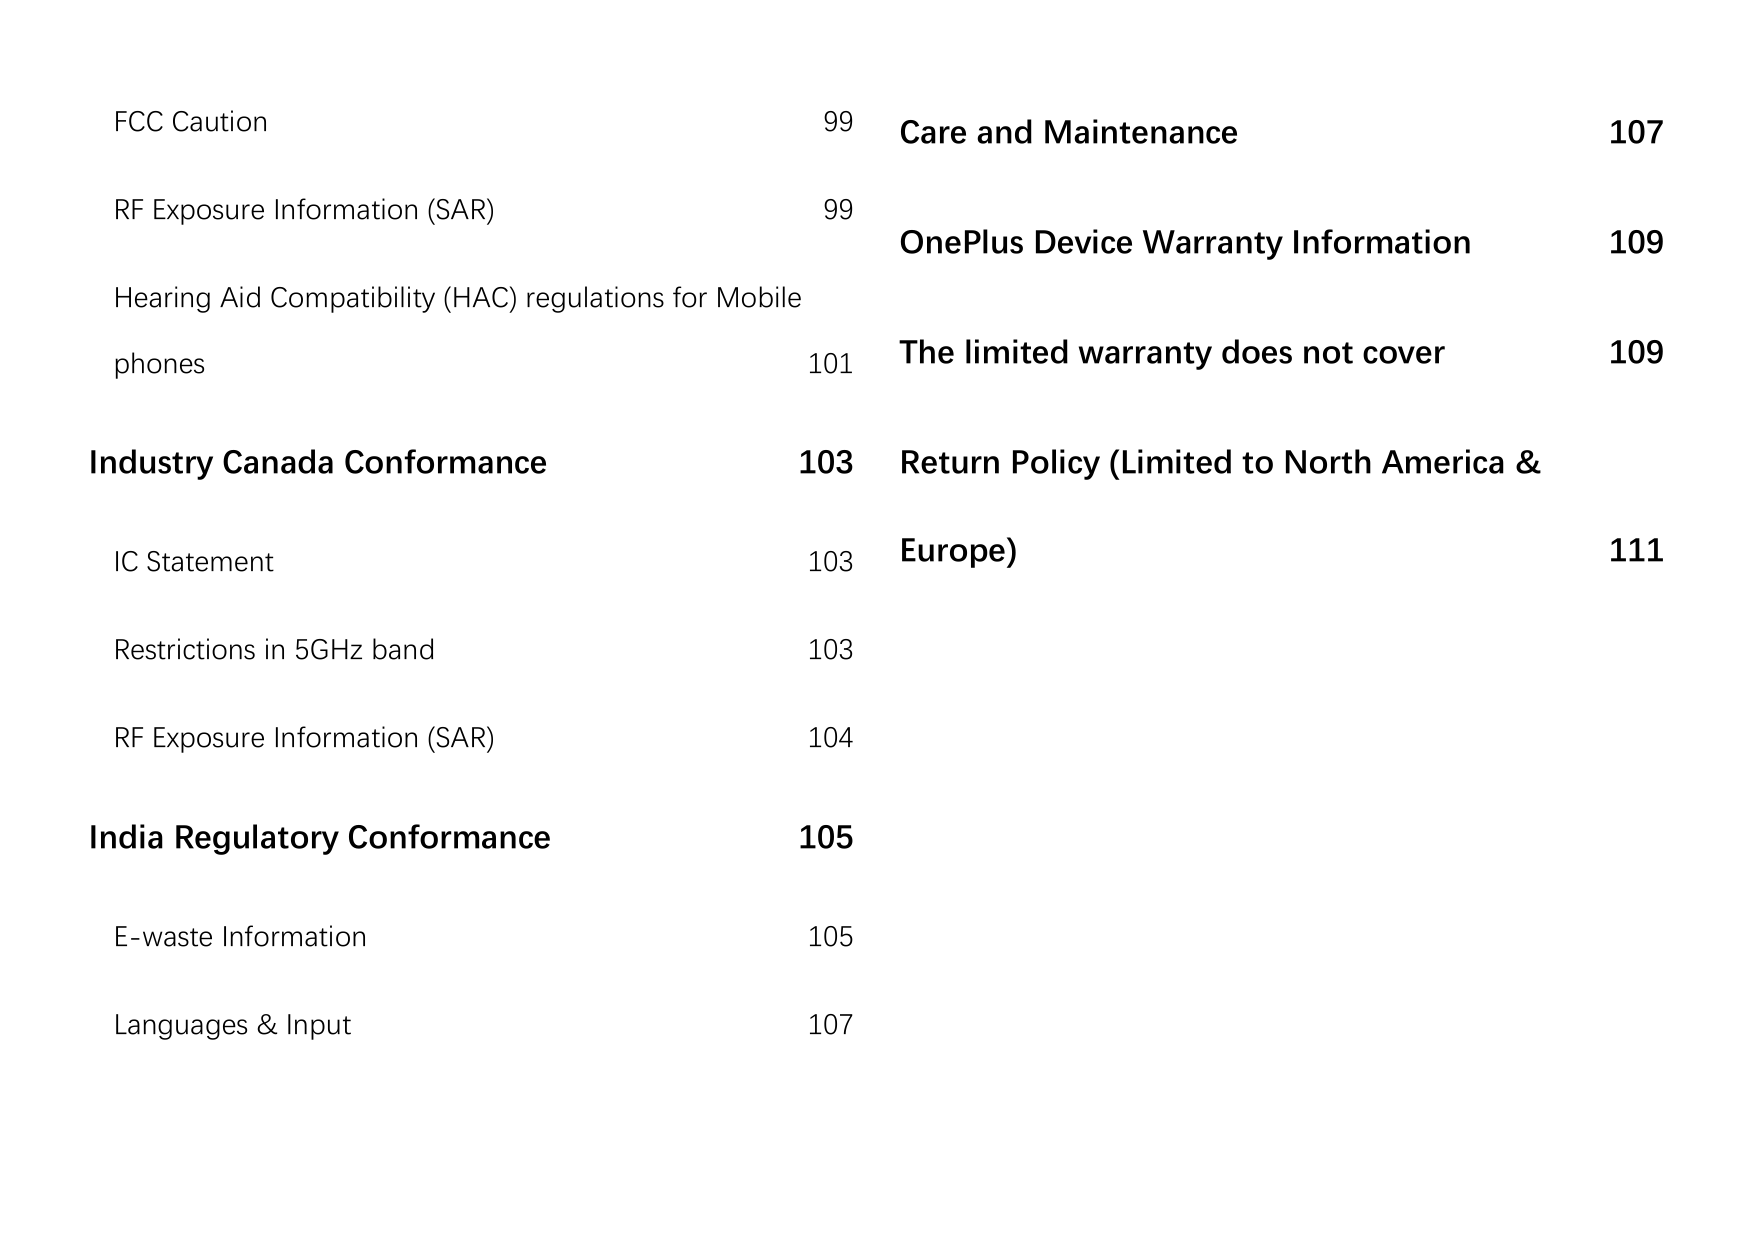 FCC Caution99RF Exposure Information (SAR)99Care and Maintenance107OnePlus Device Warranty Information109The limited warranty do